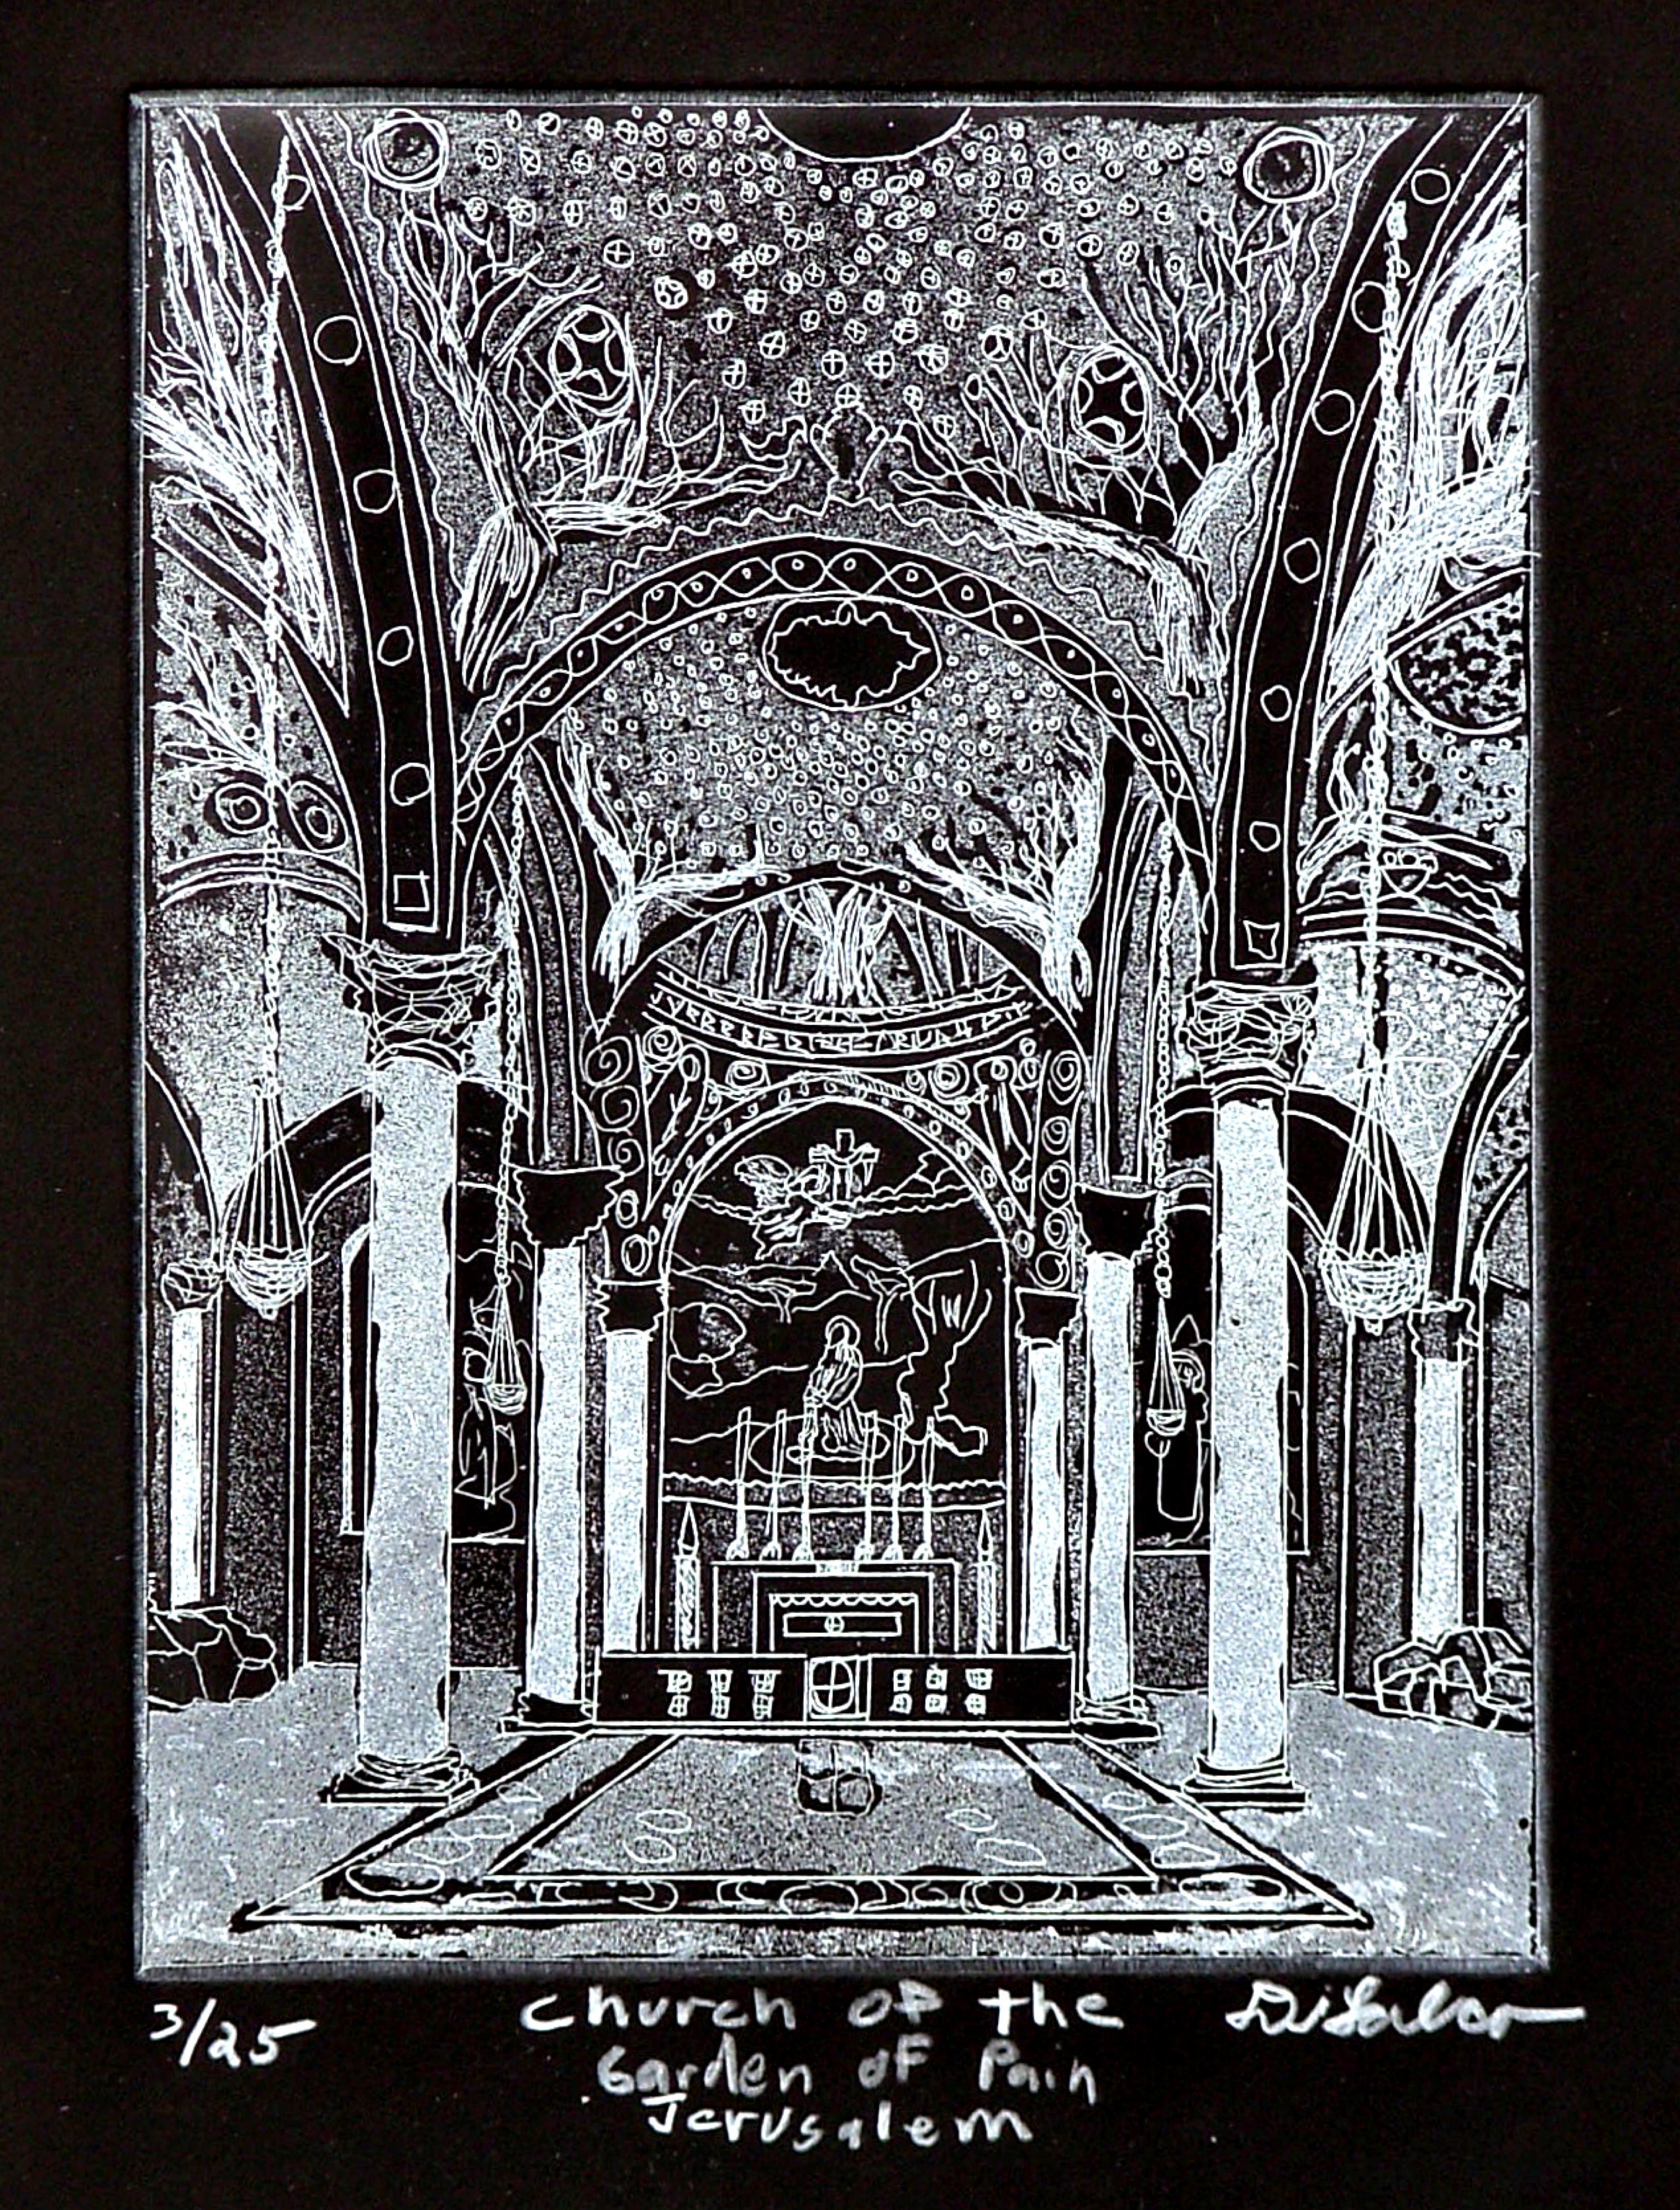 Jerry  Di Falco: 'Church of the Garden of Pain in Jerusalem', 2011 Etching, Ethereal. The work was hand printed and published by the artist at The Center for Works on Paper in Philadelphia, Pennsylvania. Please note that this etching is shipped to the collector without a frame or mat. This keeps the price low and allows the collector personal choice in matt selection and ...